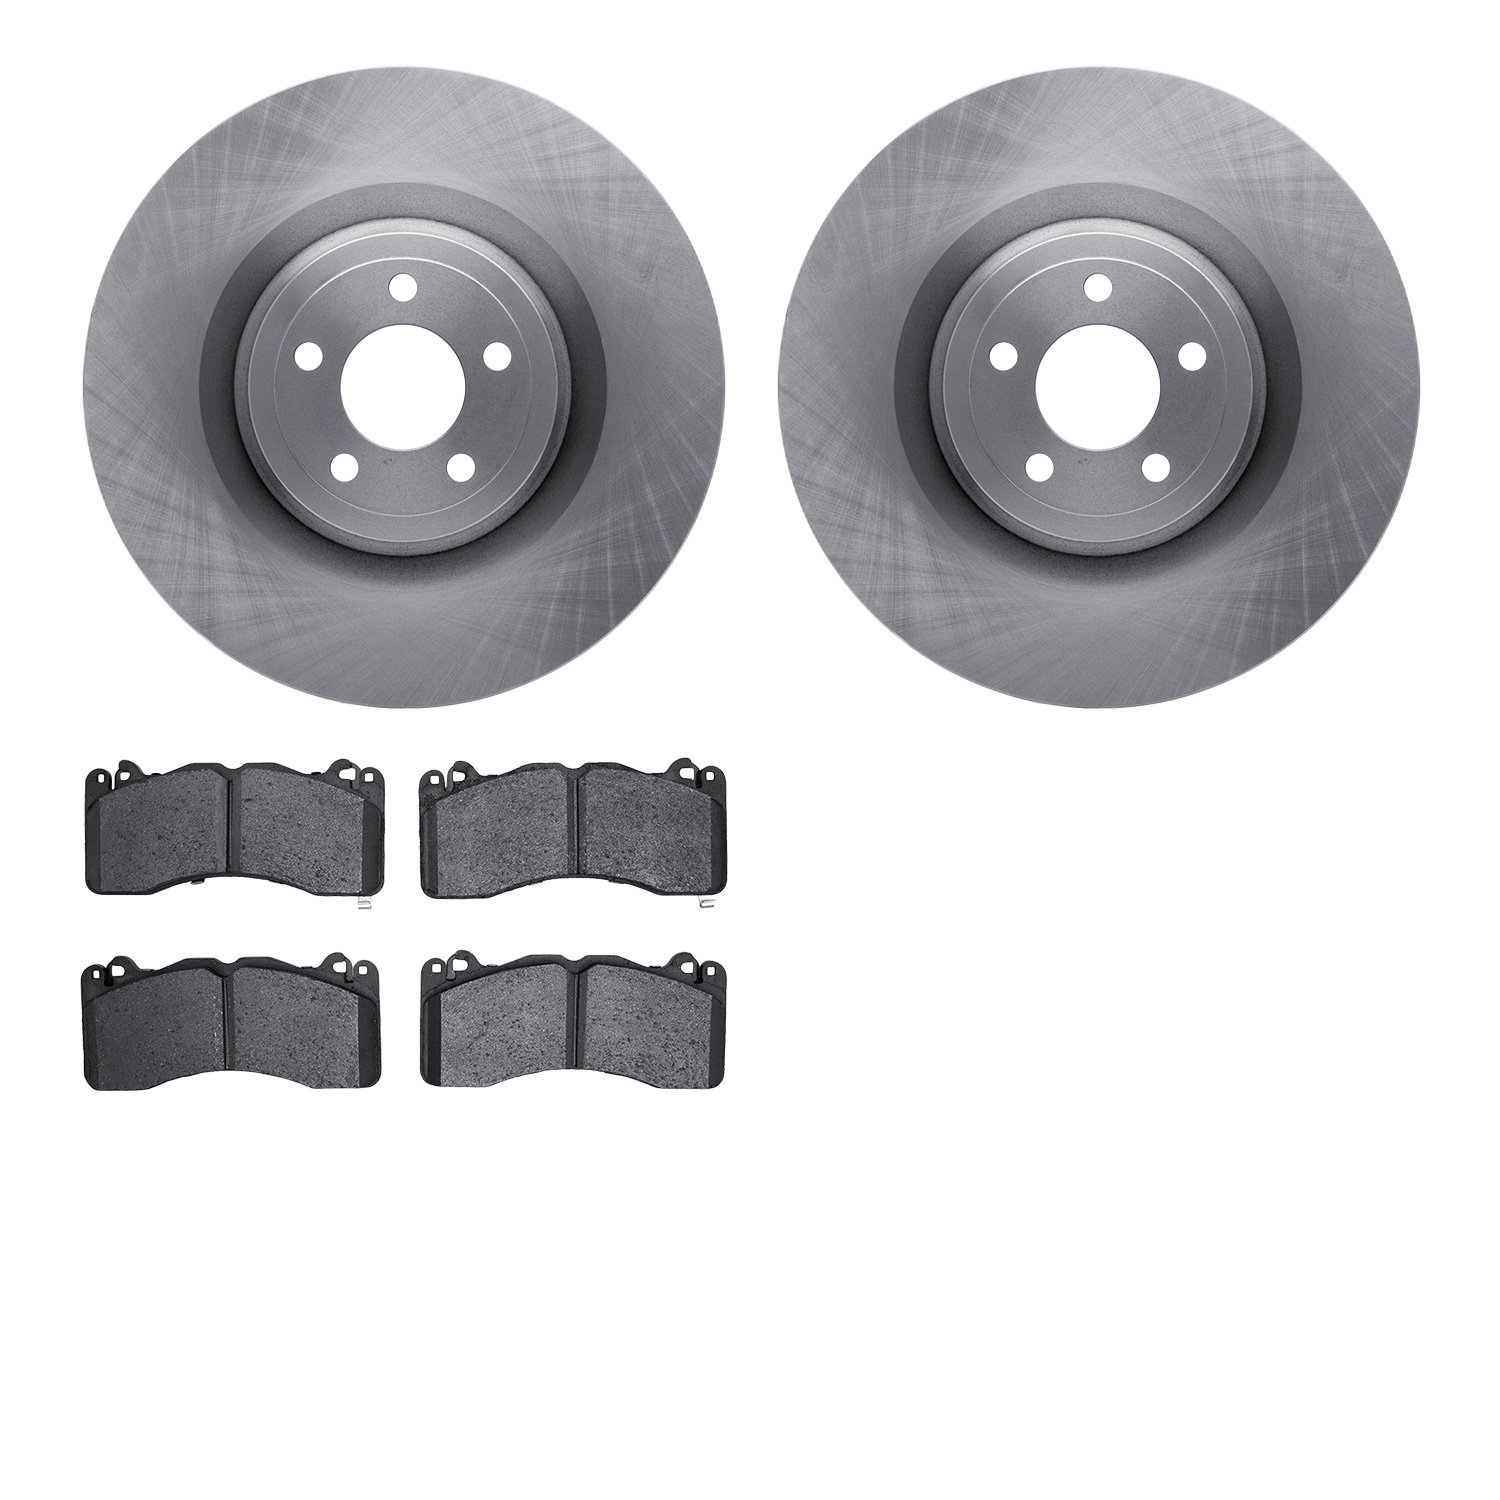 6502-99160 Brake Rotors w/5000 Advanced Brake Pads Kit, Fits Select Ford/Lincoln/Mercury/Mazda, Position: Front